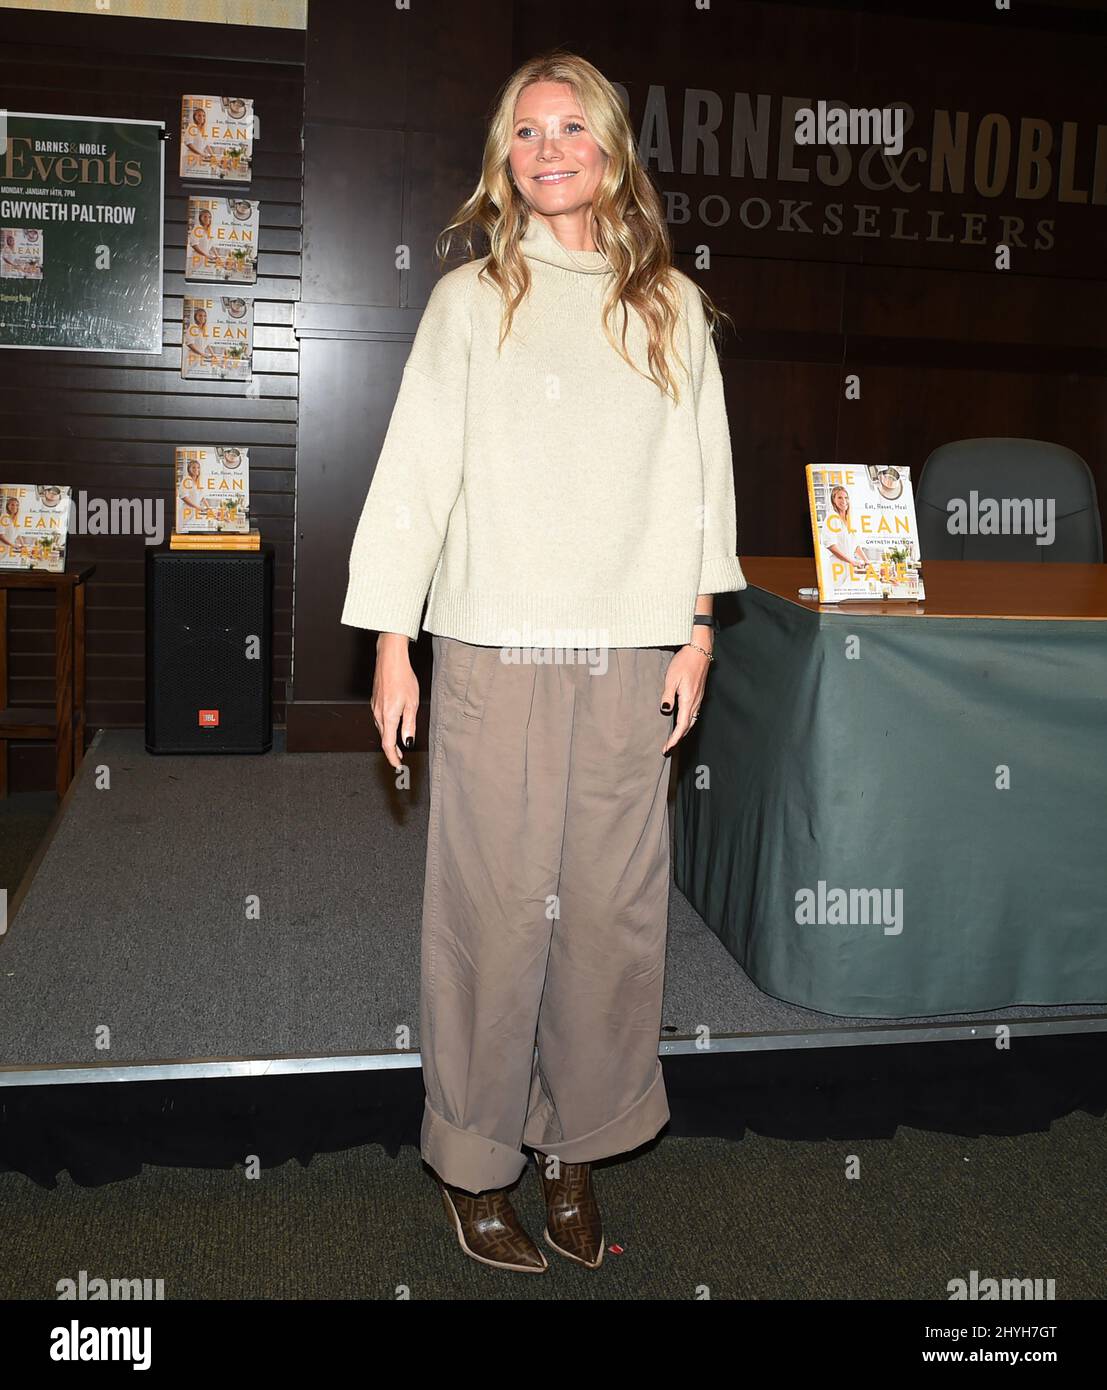 Gwyneth Paltrow signiert Kopien von „The Clean Plate“ bei Barnes and Noble at the Grove Stockfoto